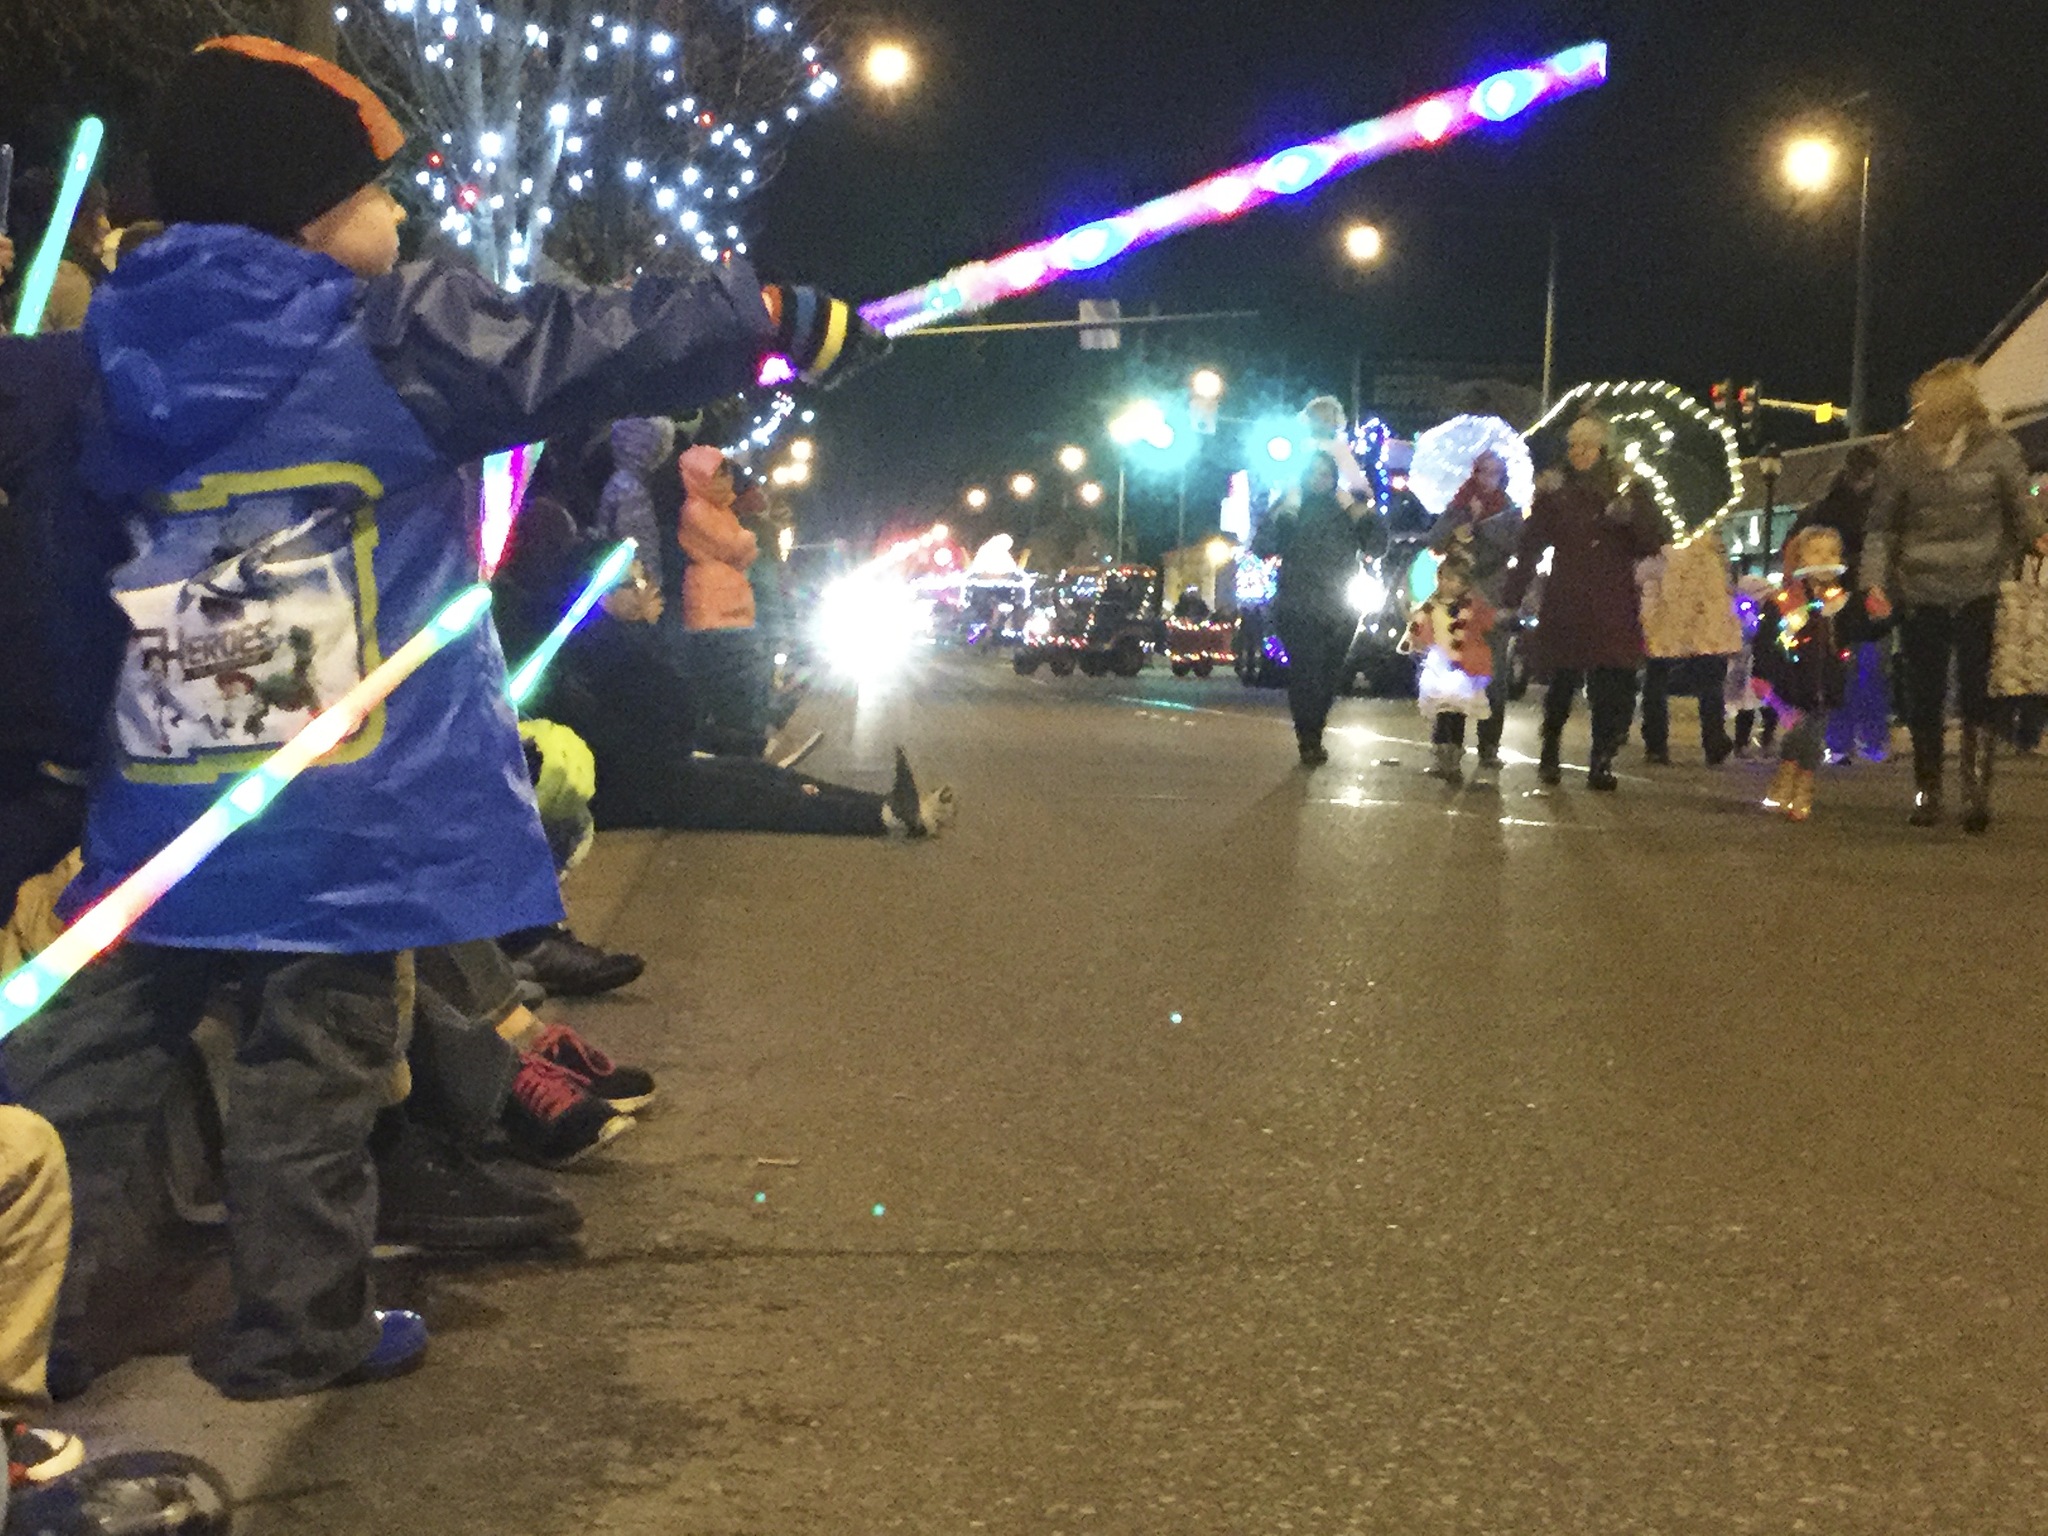 City brings holiday cheer to community with Merrysville for the Holidays and lights parade